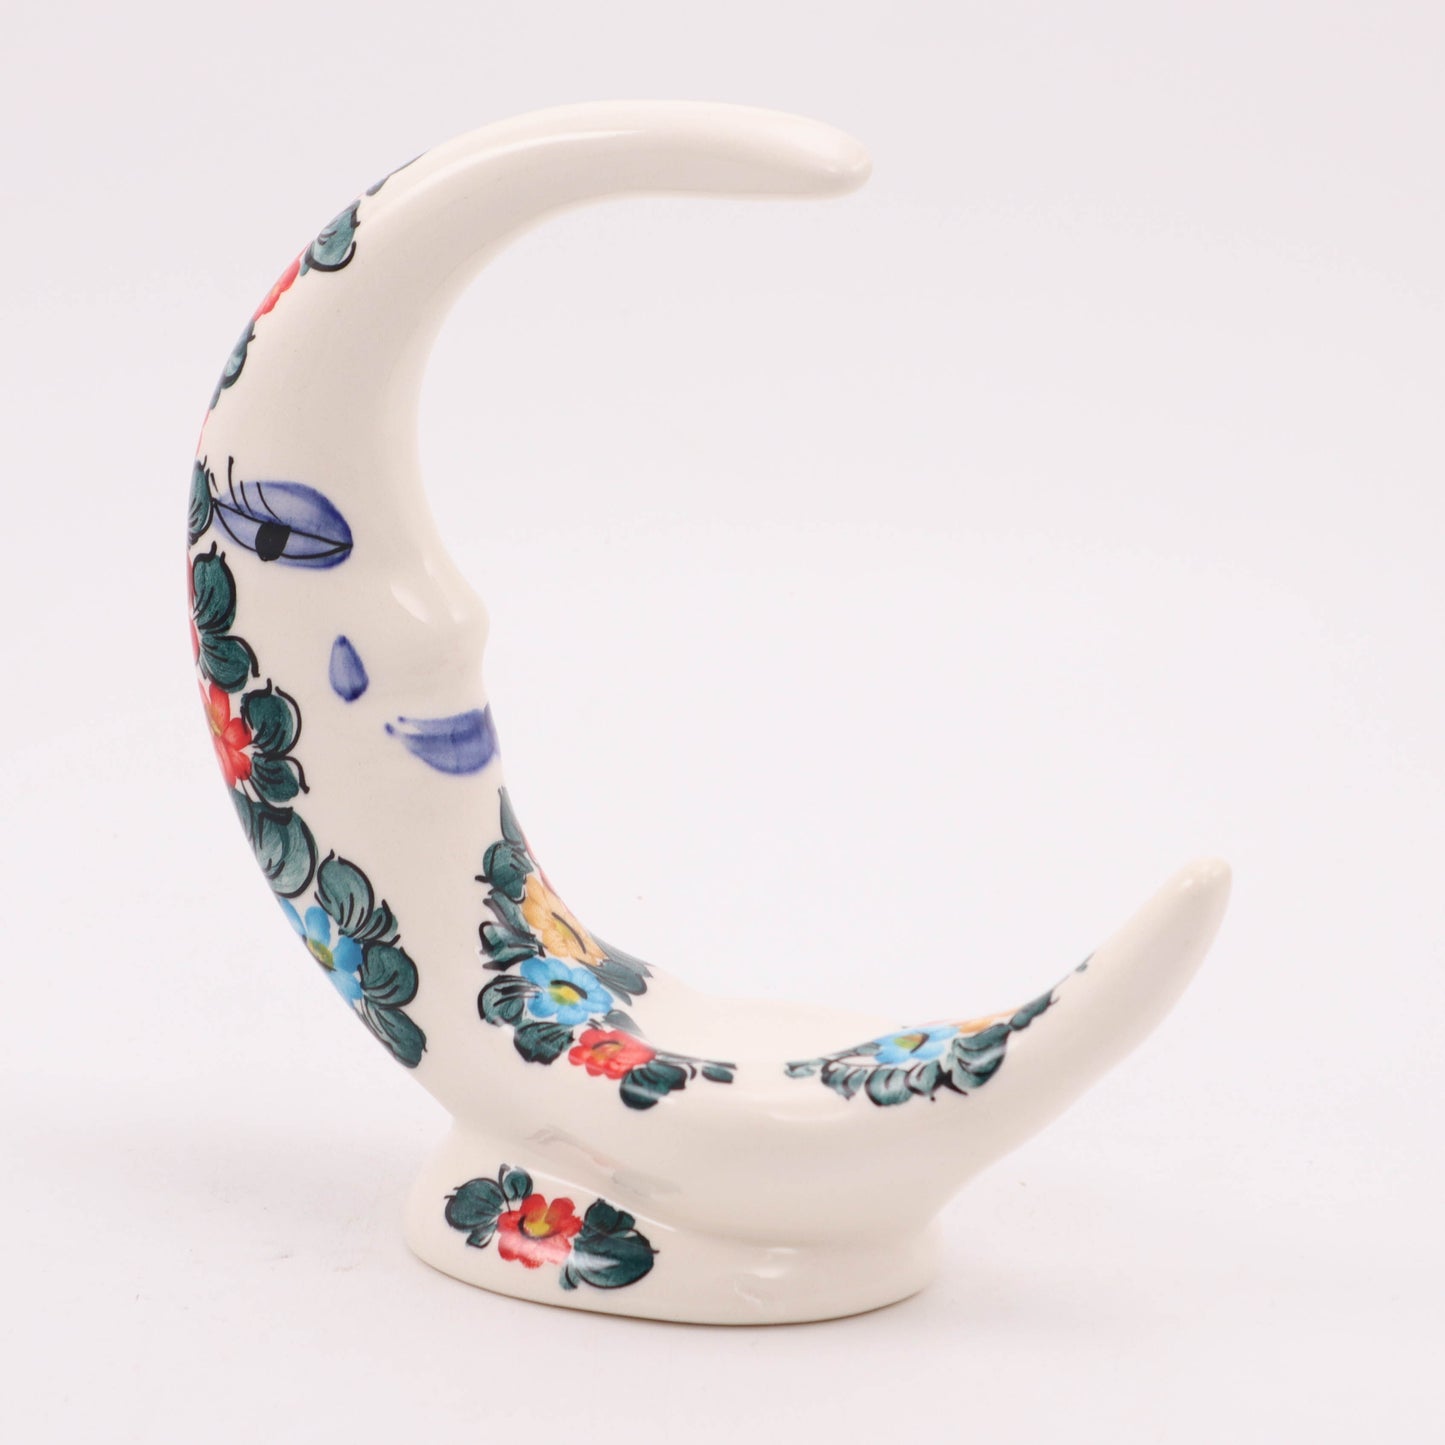 7"x8" Crescent Moon Tealight Holder. Pattern: Colorful